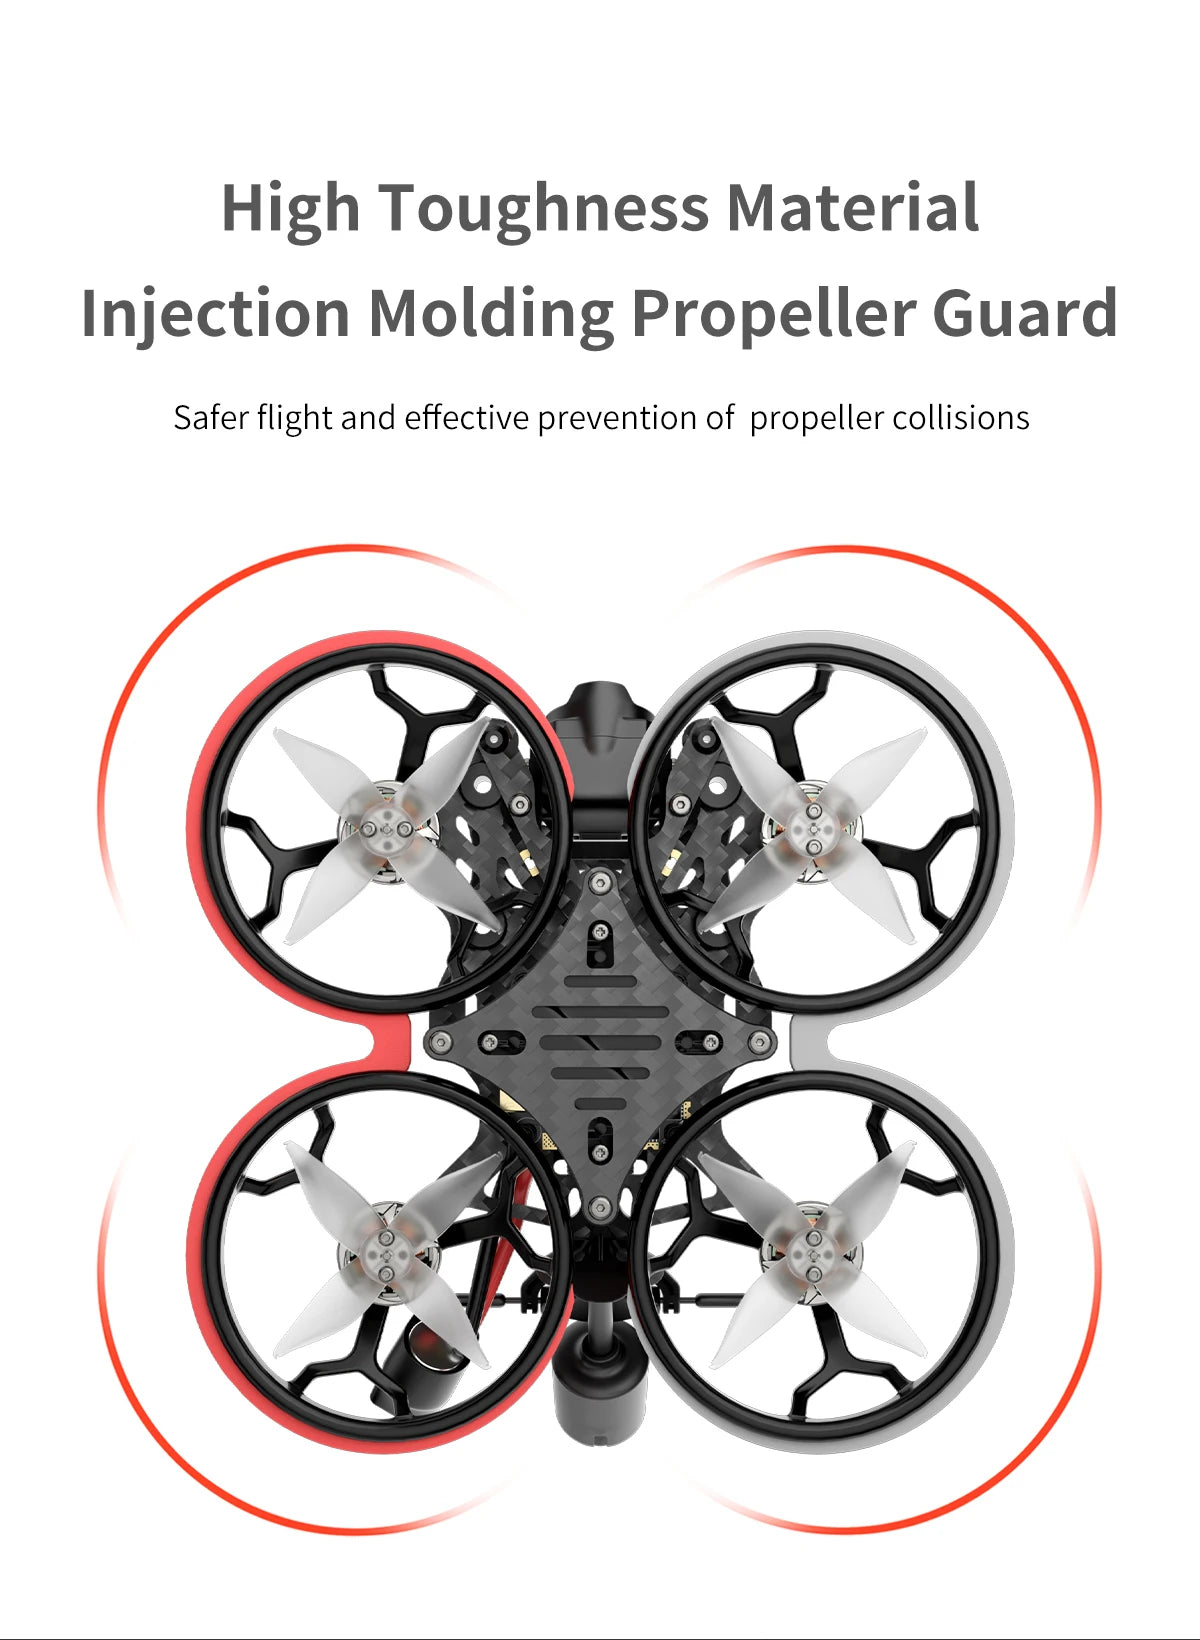 GEPRC Cinelog20 Analog FPV Drone, High Toughness Material Injection Molding Propeller Guard Safer flight and effective prevention of